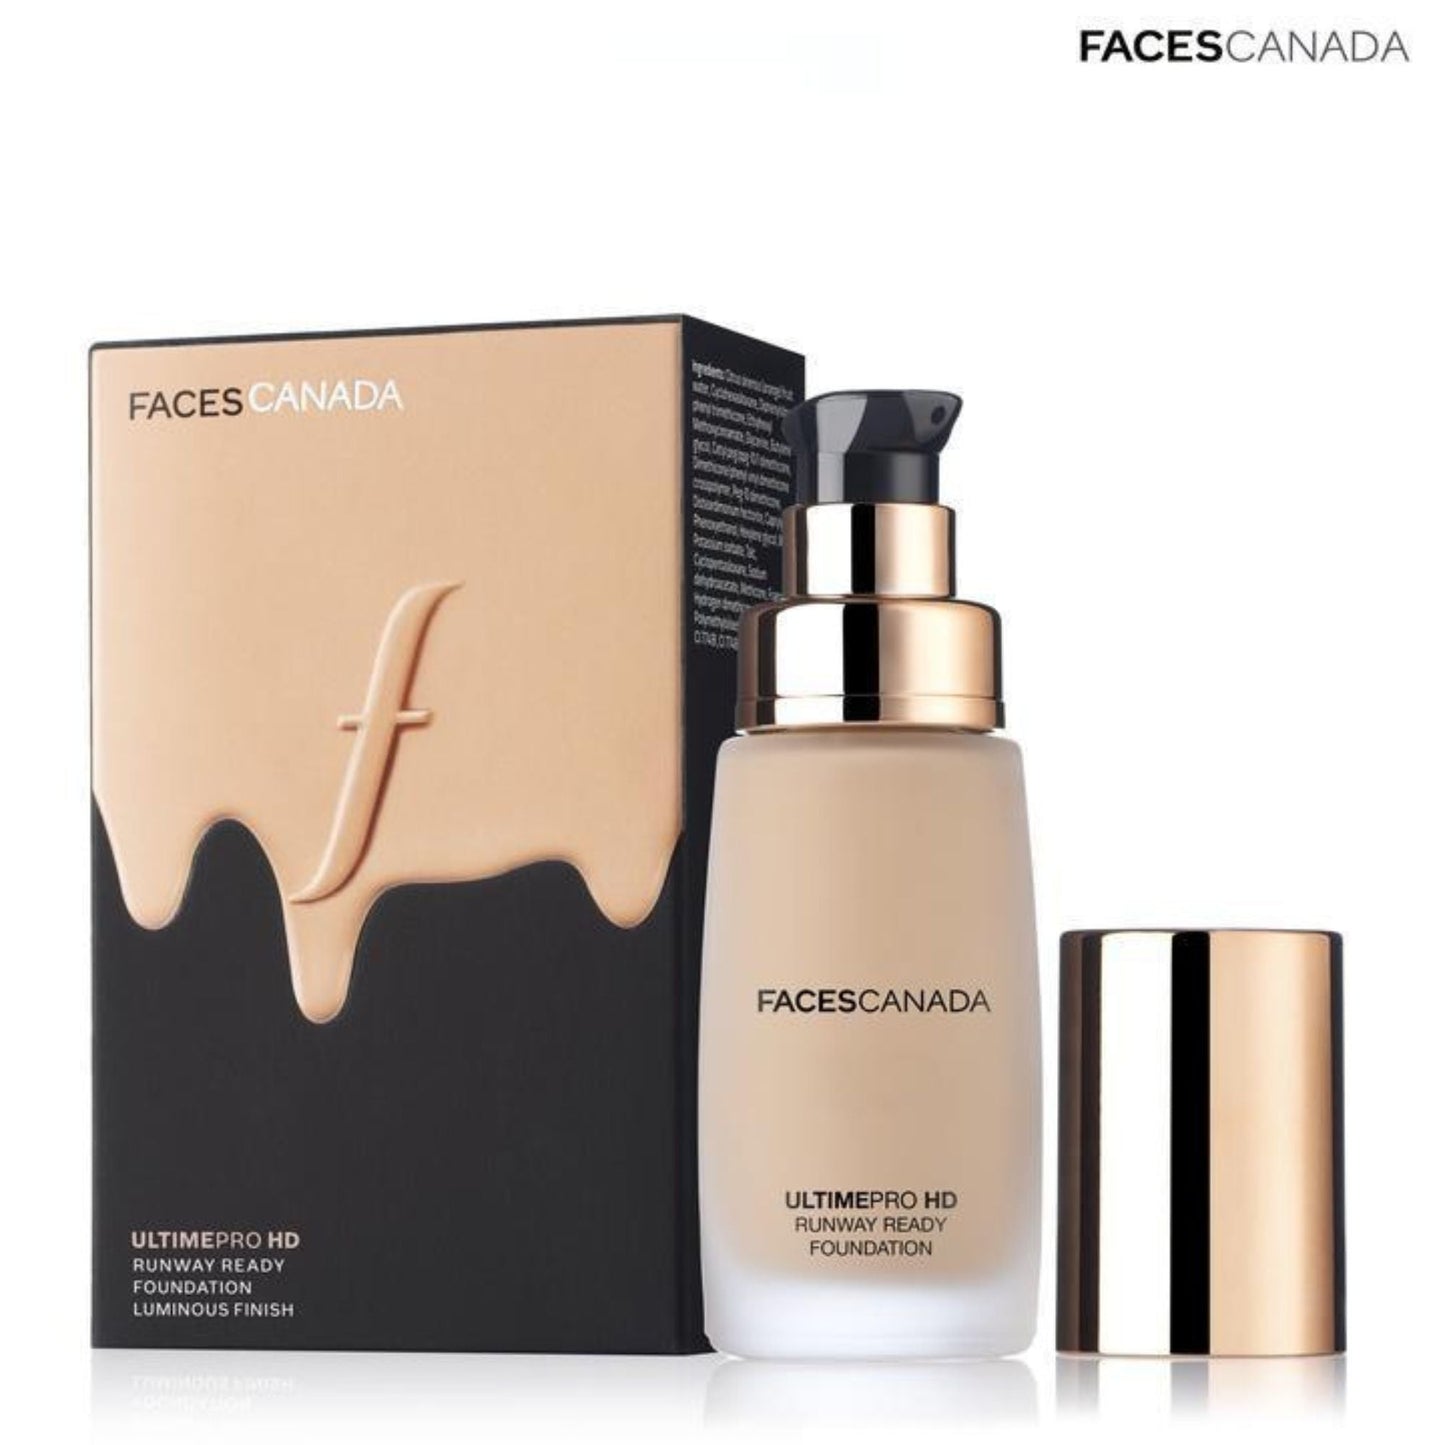 Faces Canada Ultime Pro Hd Runway Ready Foundation Ivory 01 30Ml